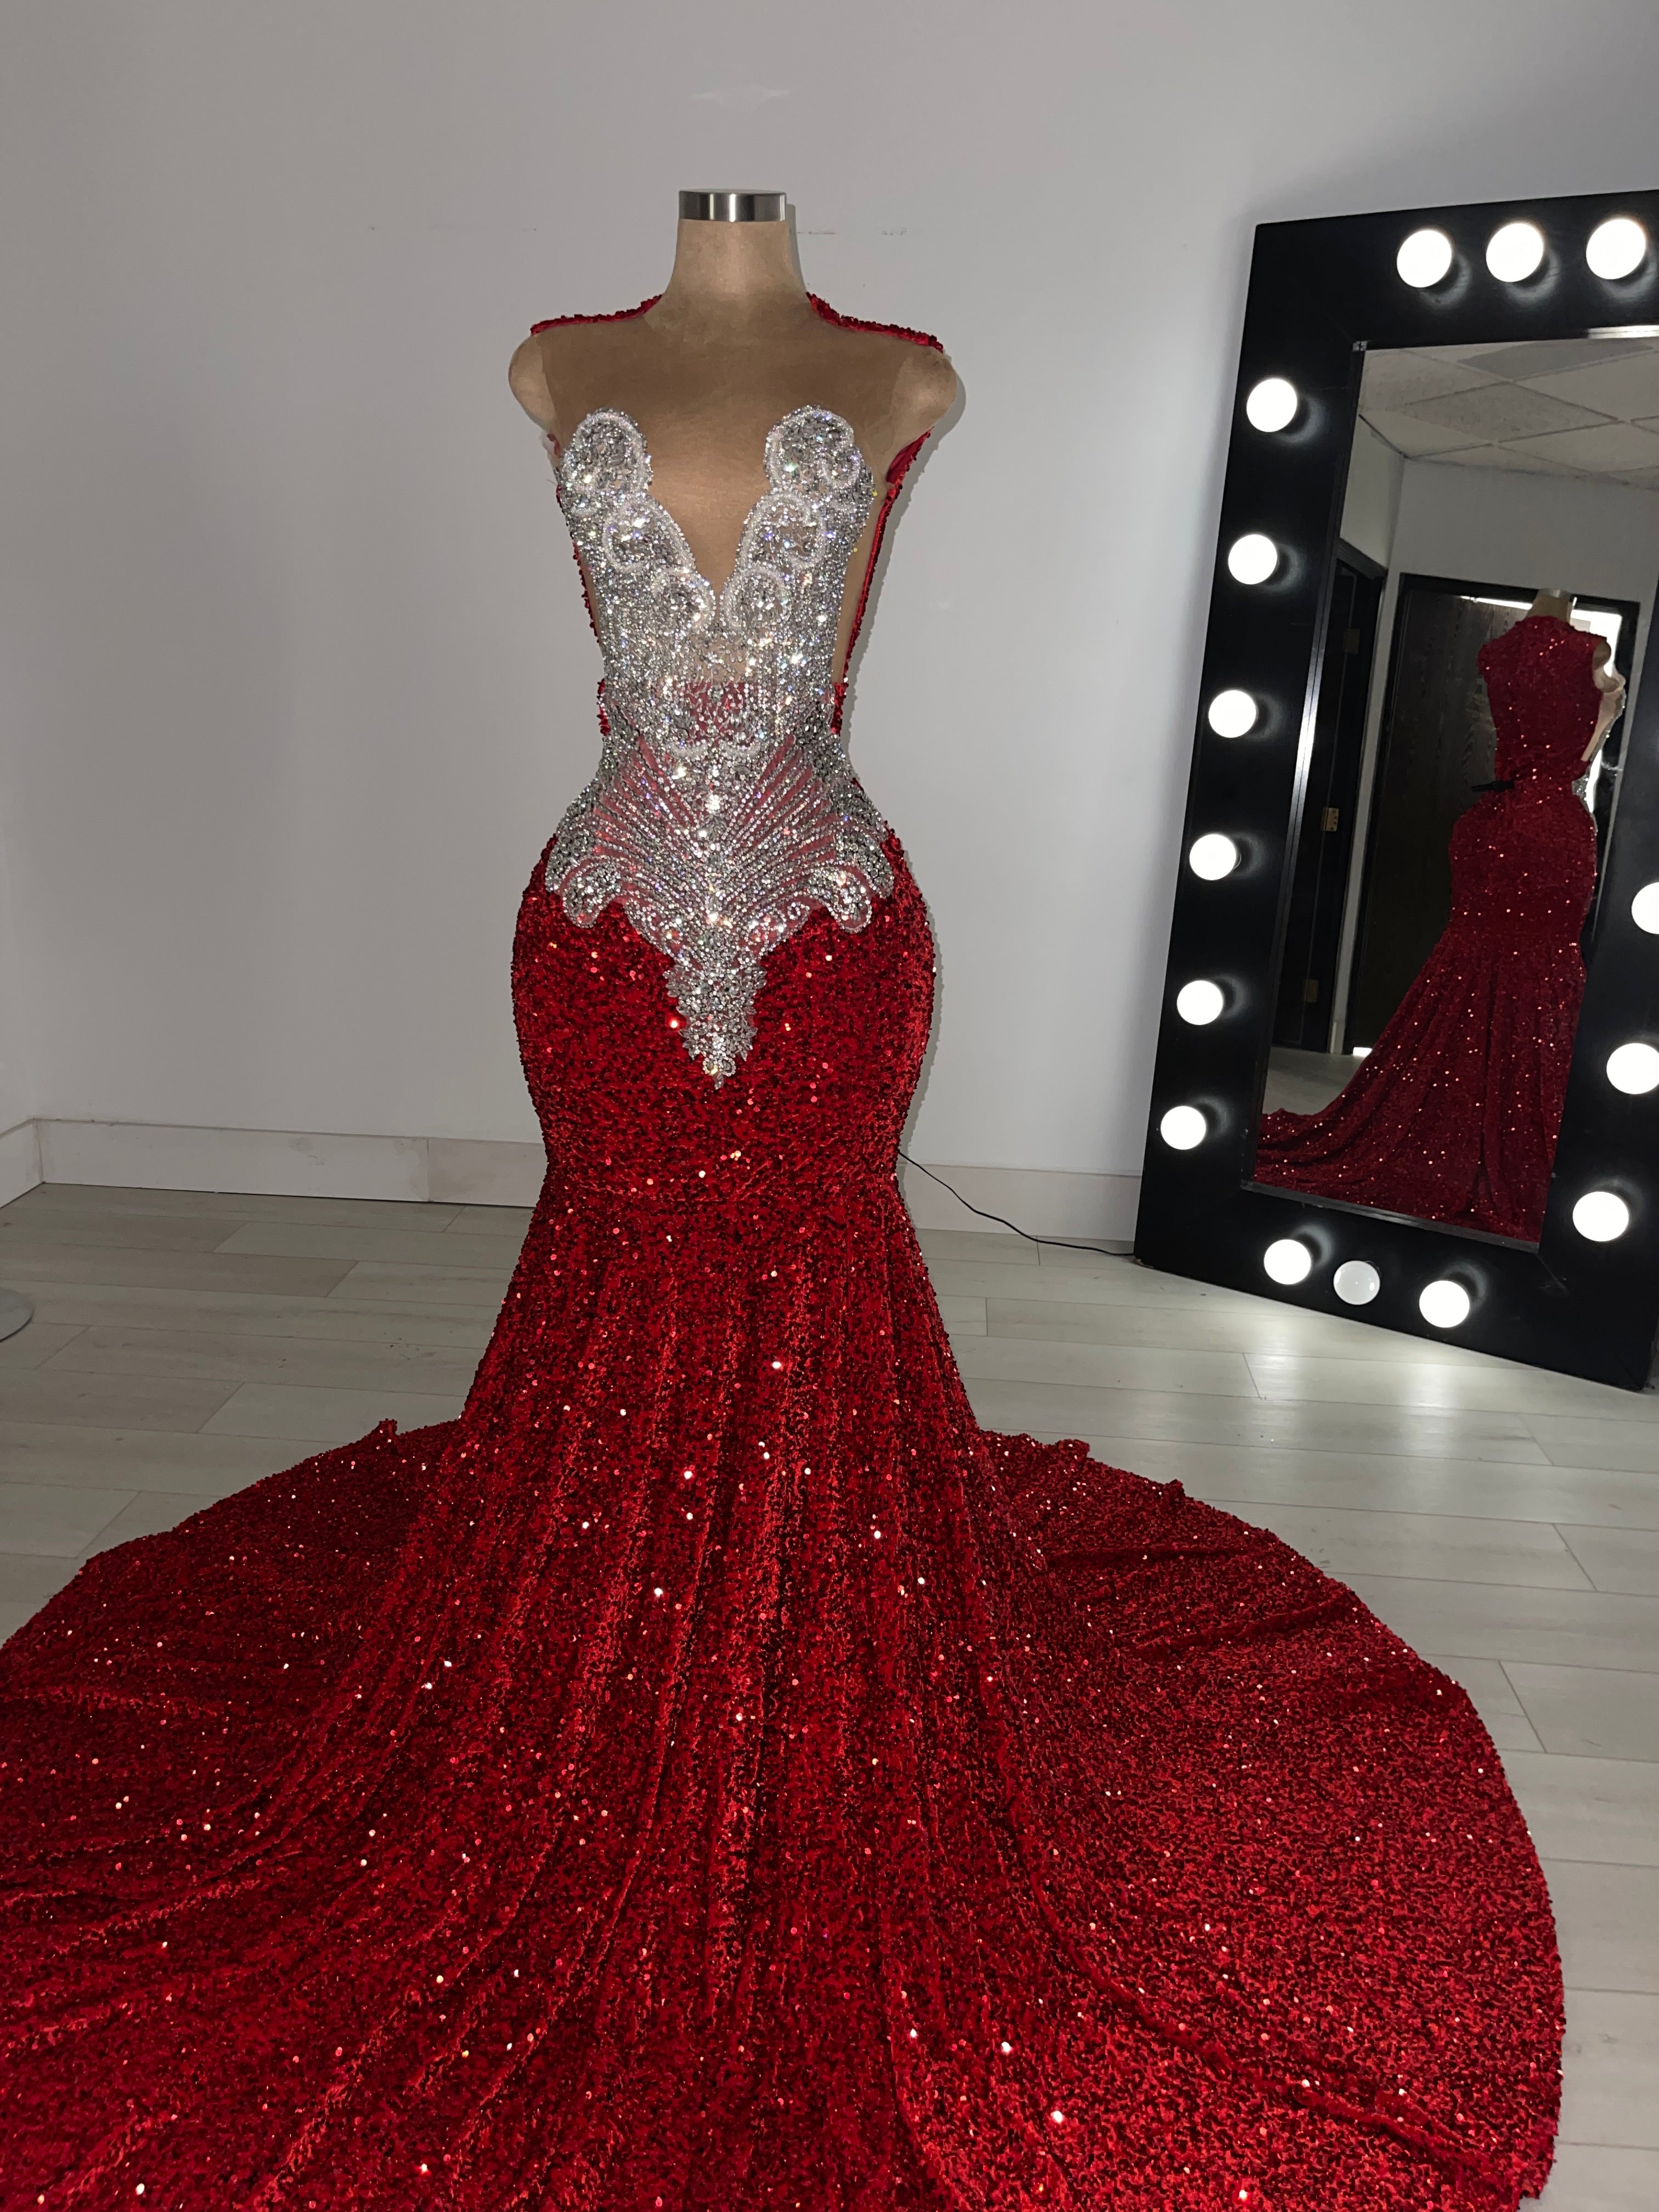 DESTINY - Red Sequin Prom Dress with Silver Rhinestones | PREORDER -  SHIP: 03/29 - 04/05